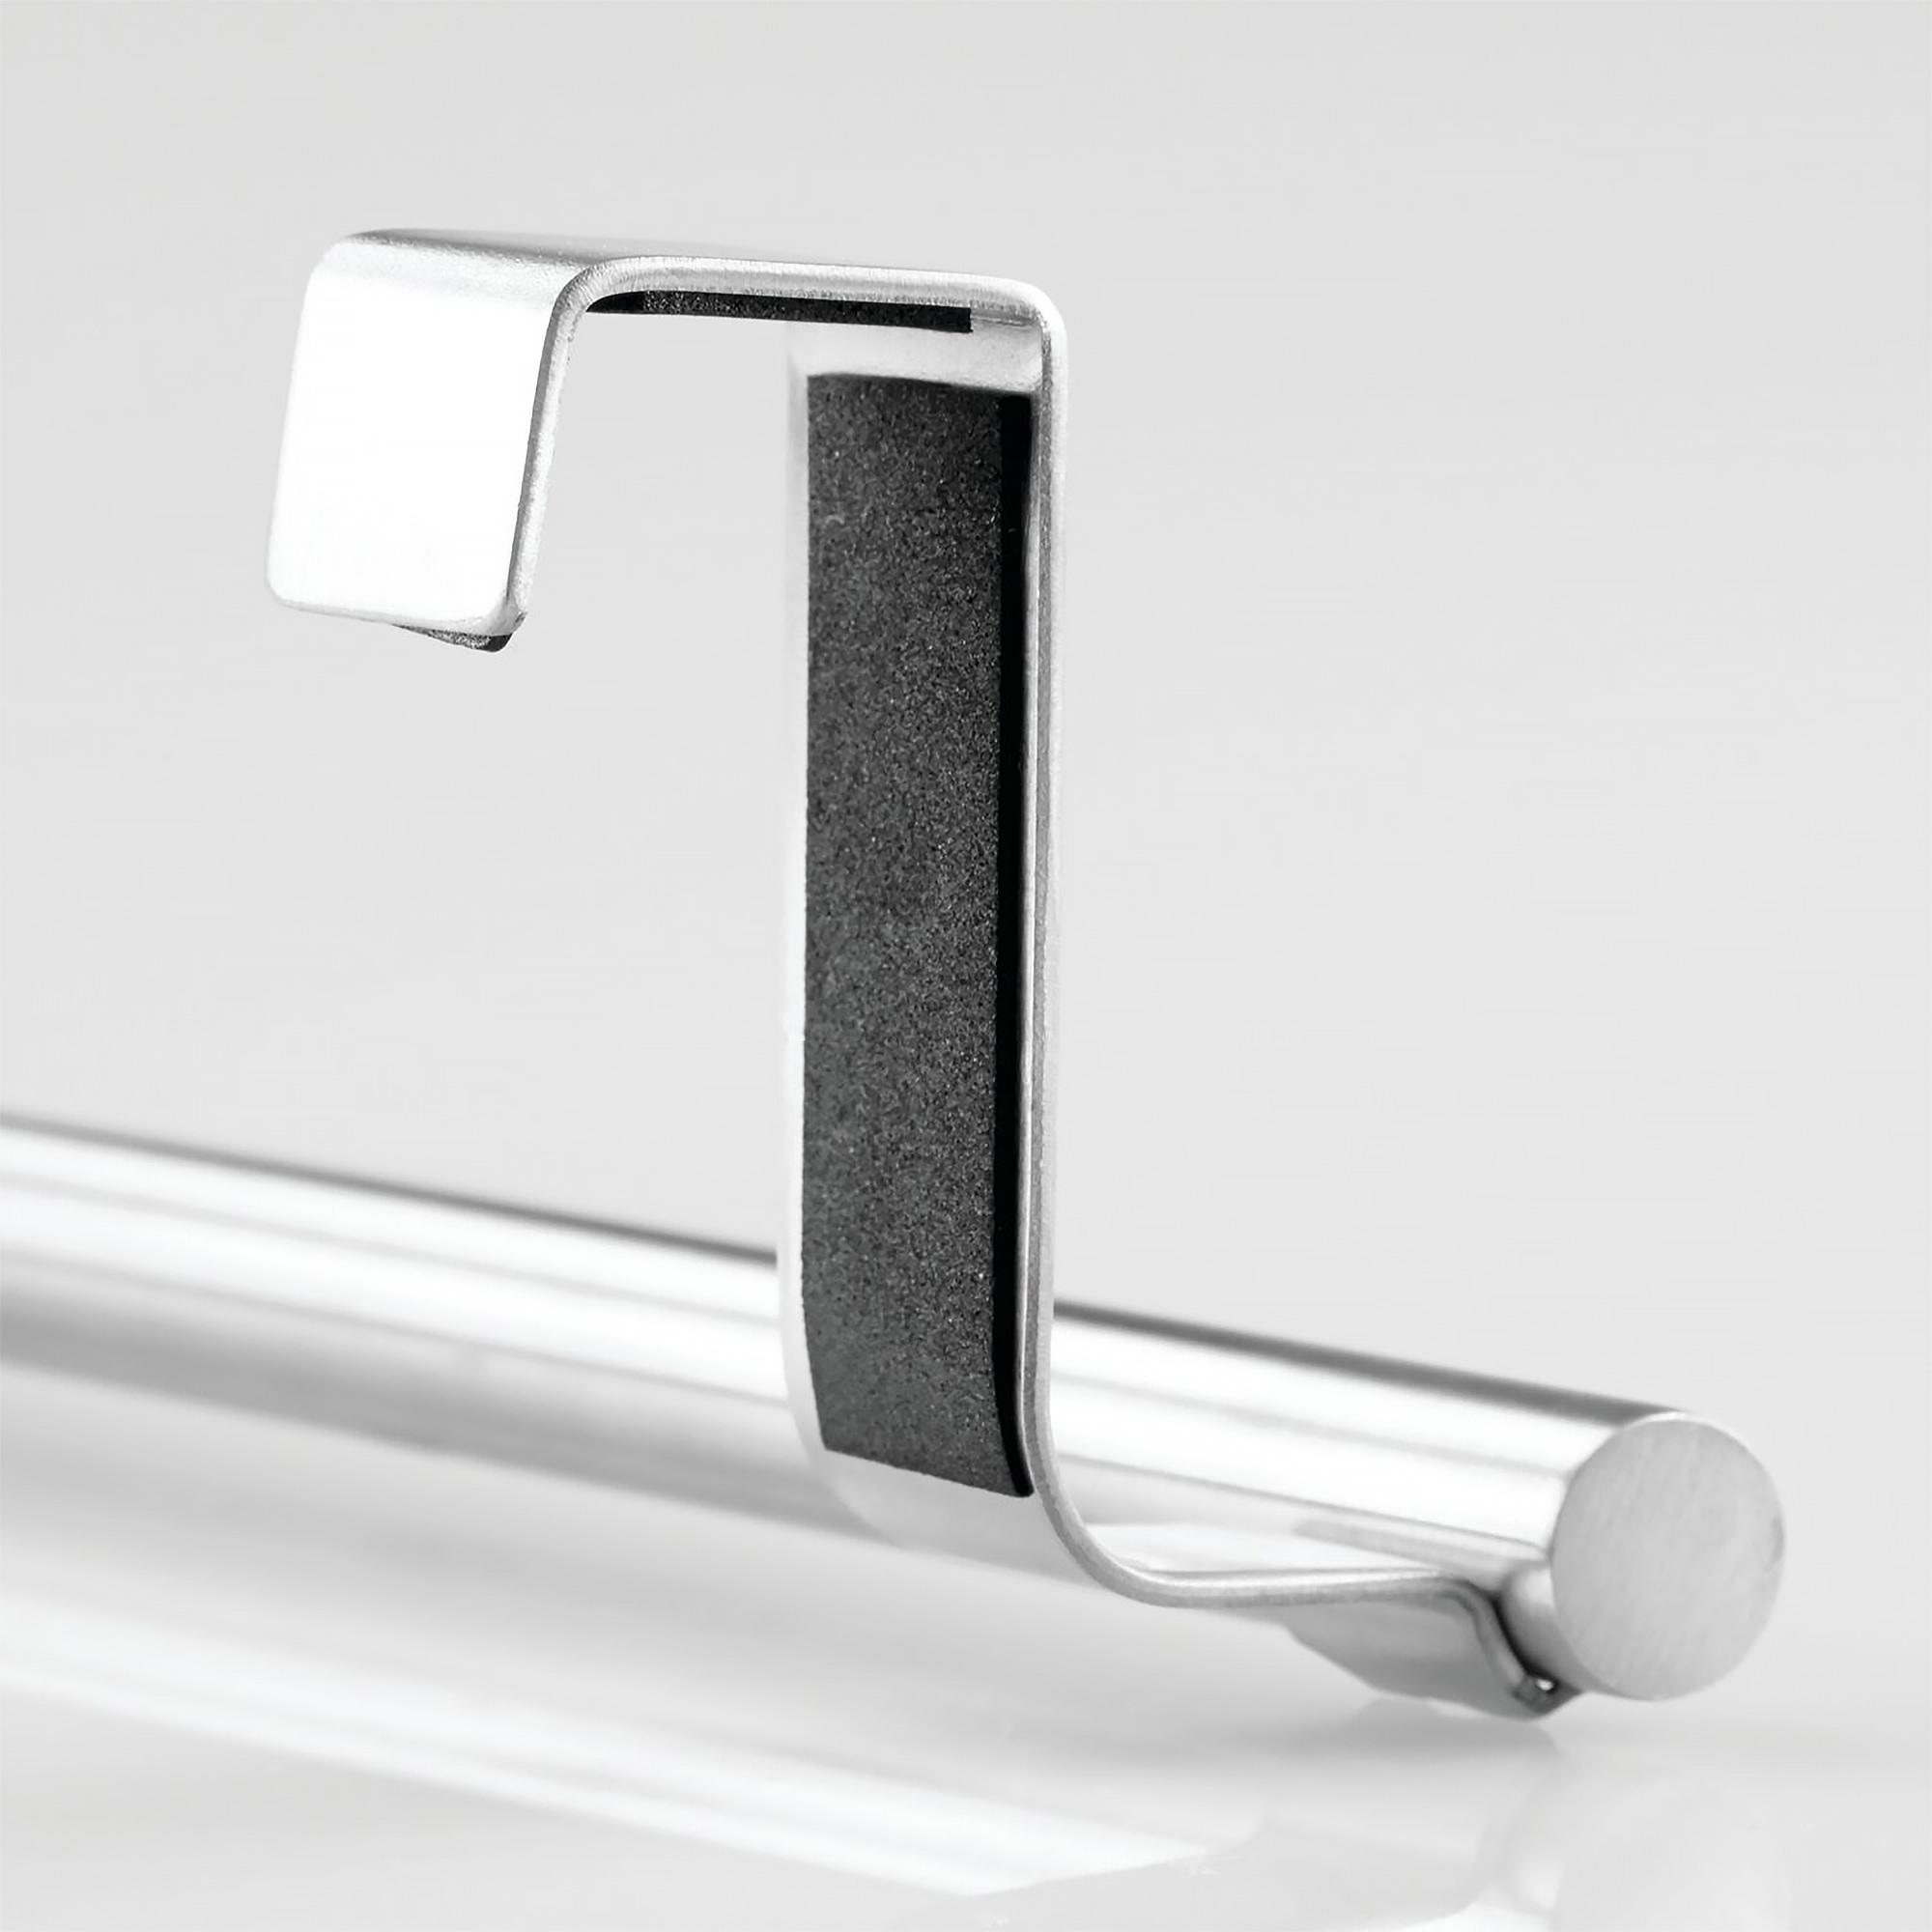 iDesign Forma Over The Cabinet Towel Bar 36x6cm Steel Image 6